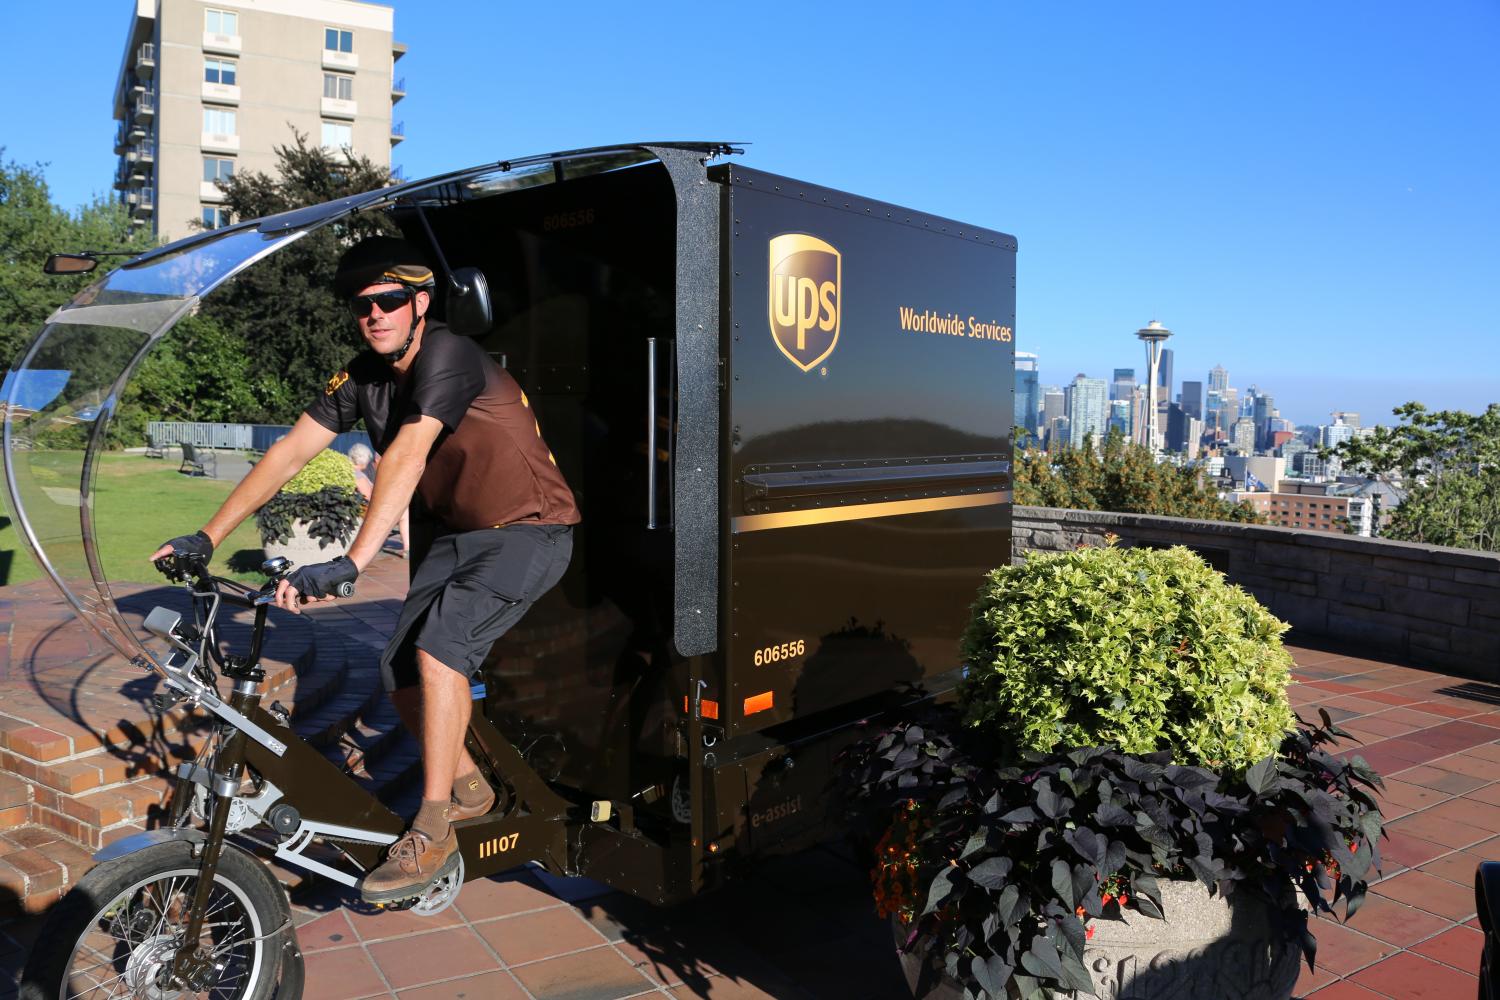 As UPS adds more hybrid and electric vehicles - and even bicycles - as it shifts to a low-carbon fleet, the rattle of the engine you hear as trucks pull up to your house with that coveted package could soon become a thing of the past.